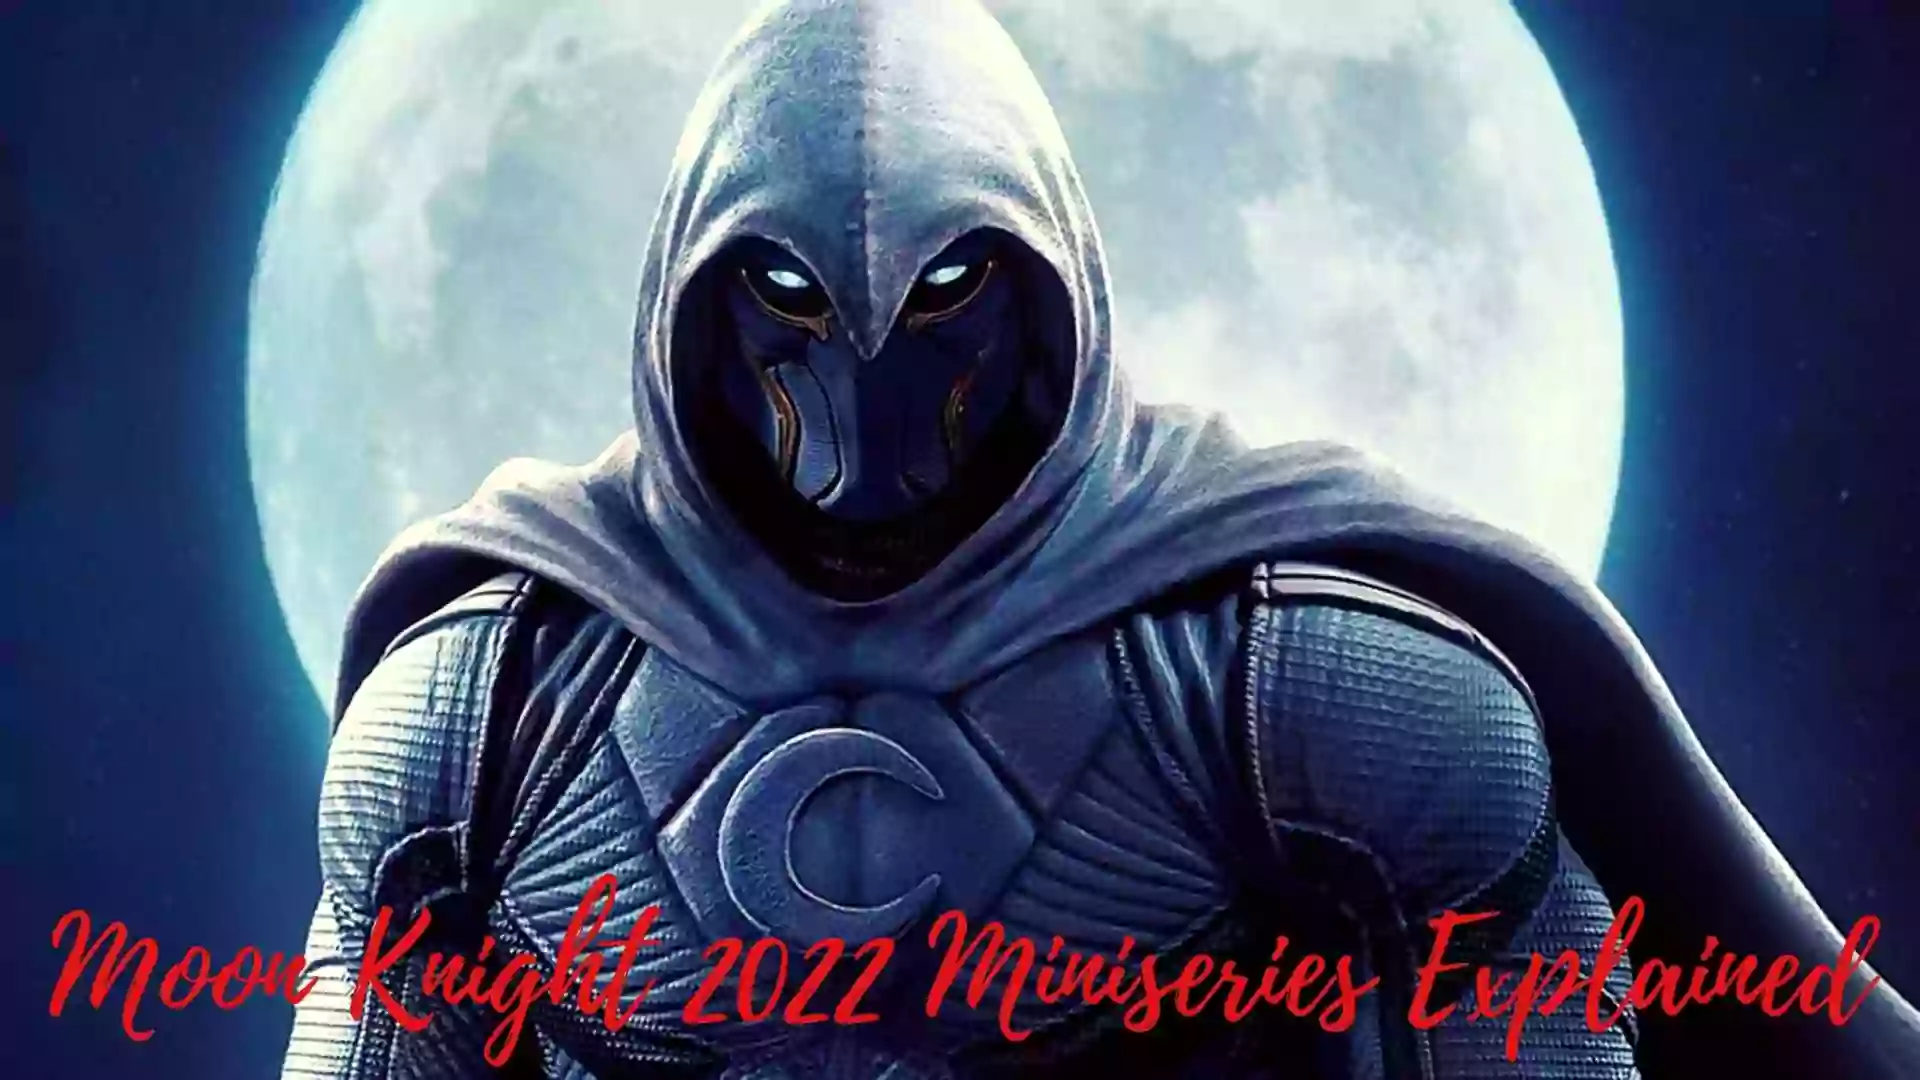 Moon Knight Explained | Moon Knight 2022 Miniseries Ending